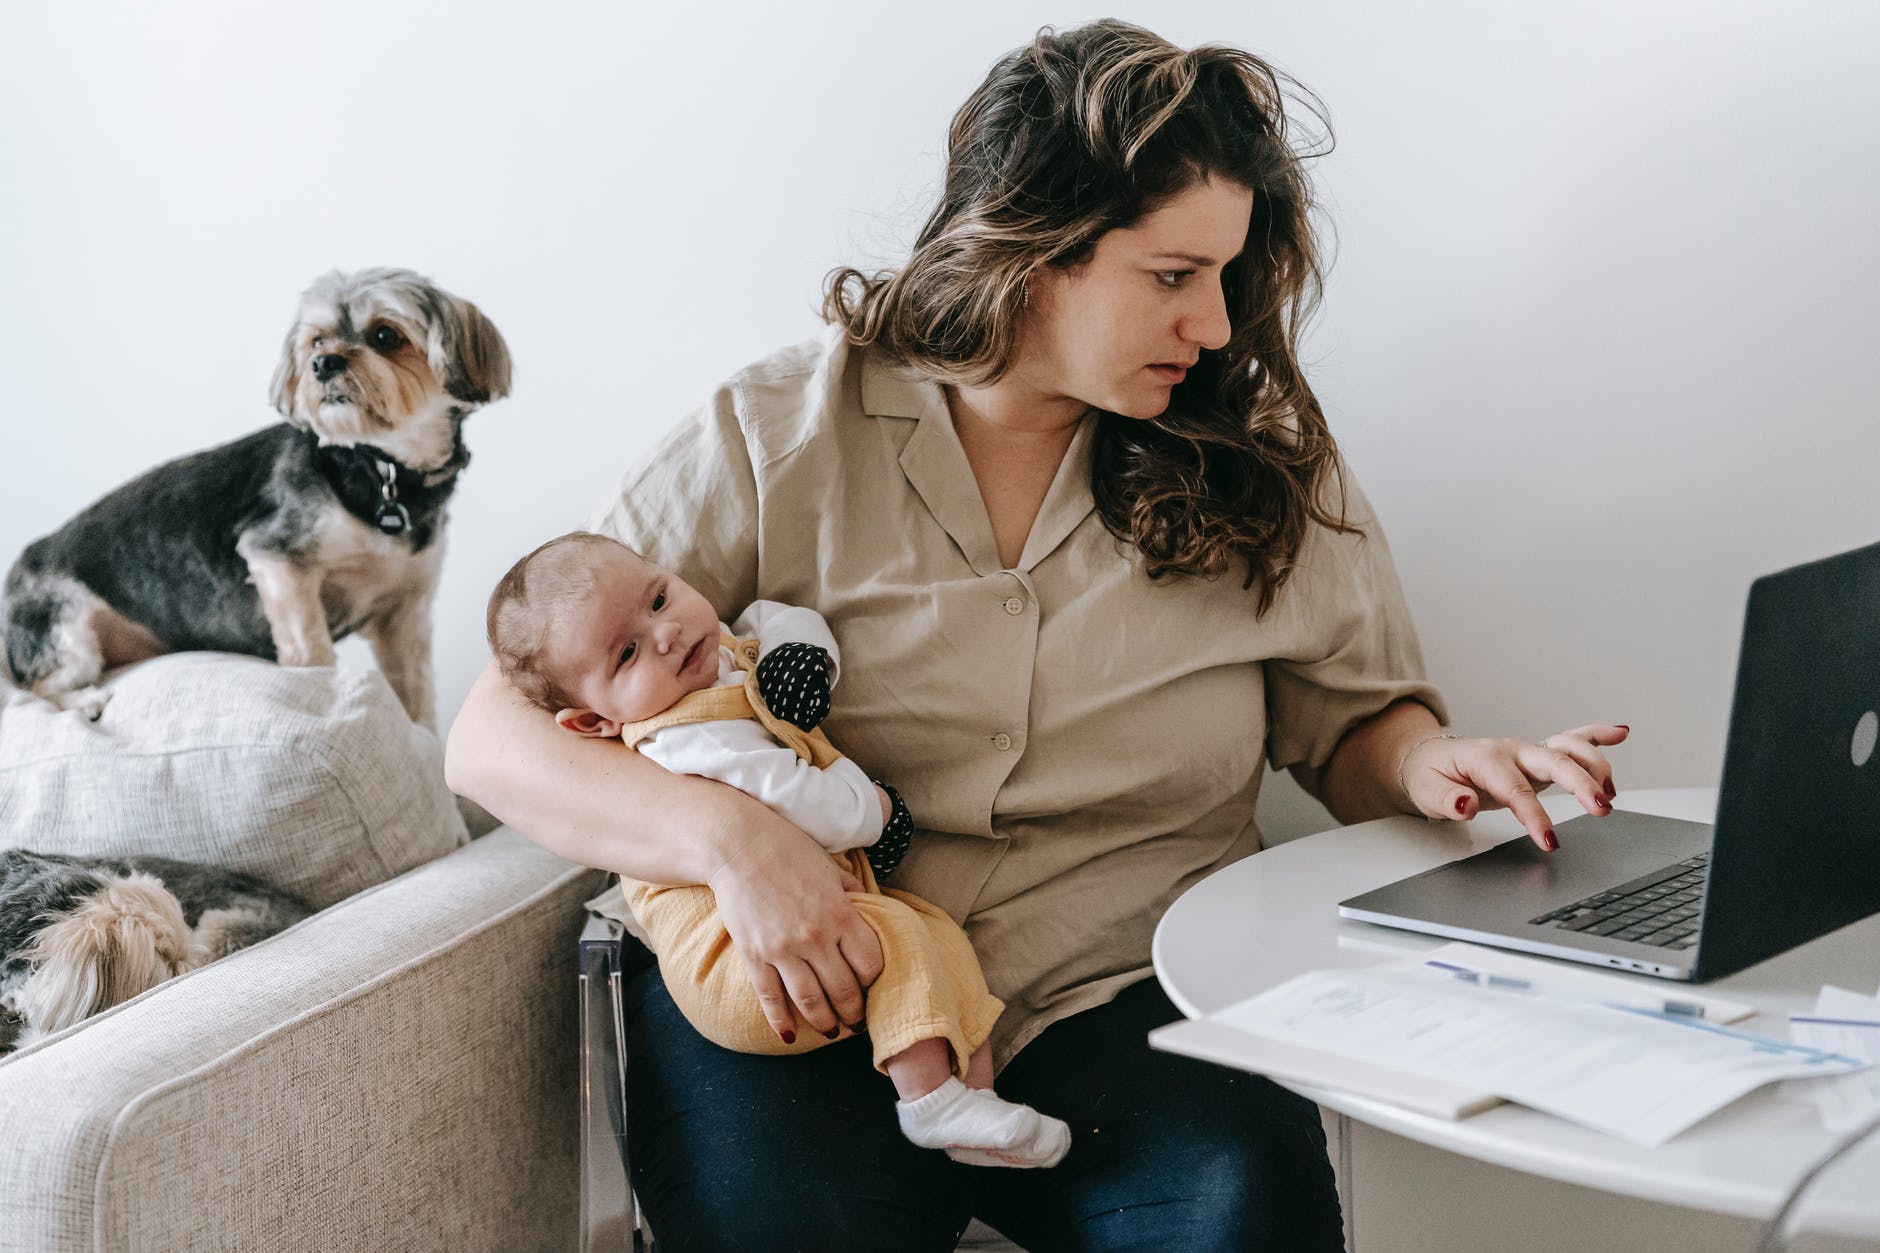 Finding A Healthy Work-Life Balance: Advice For Moms